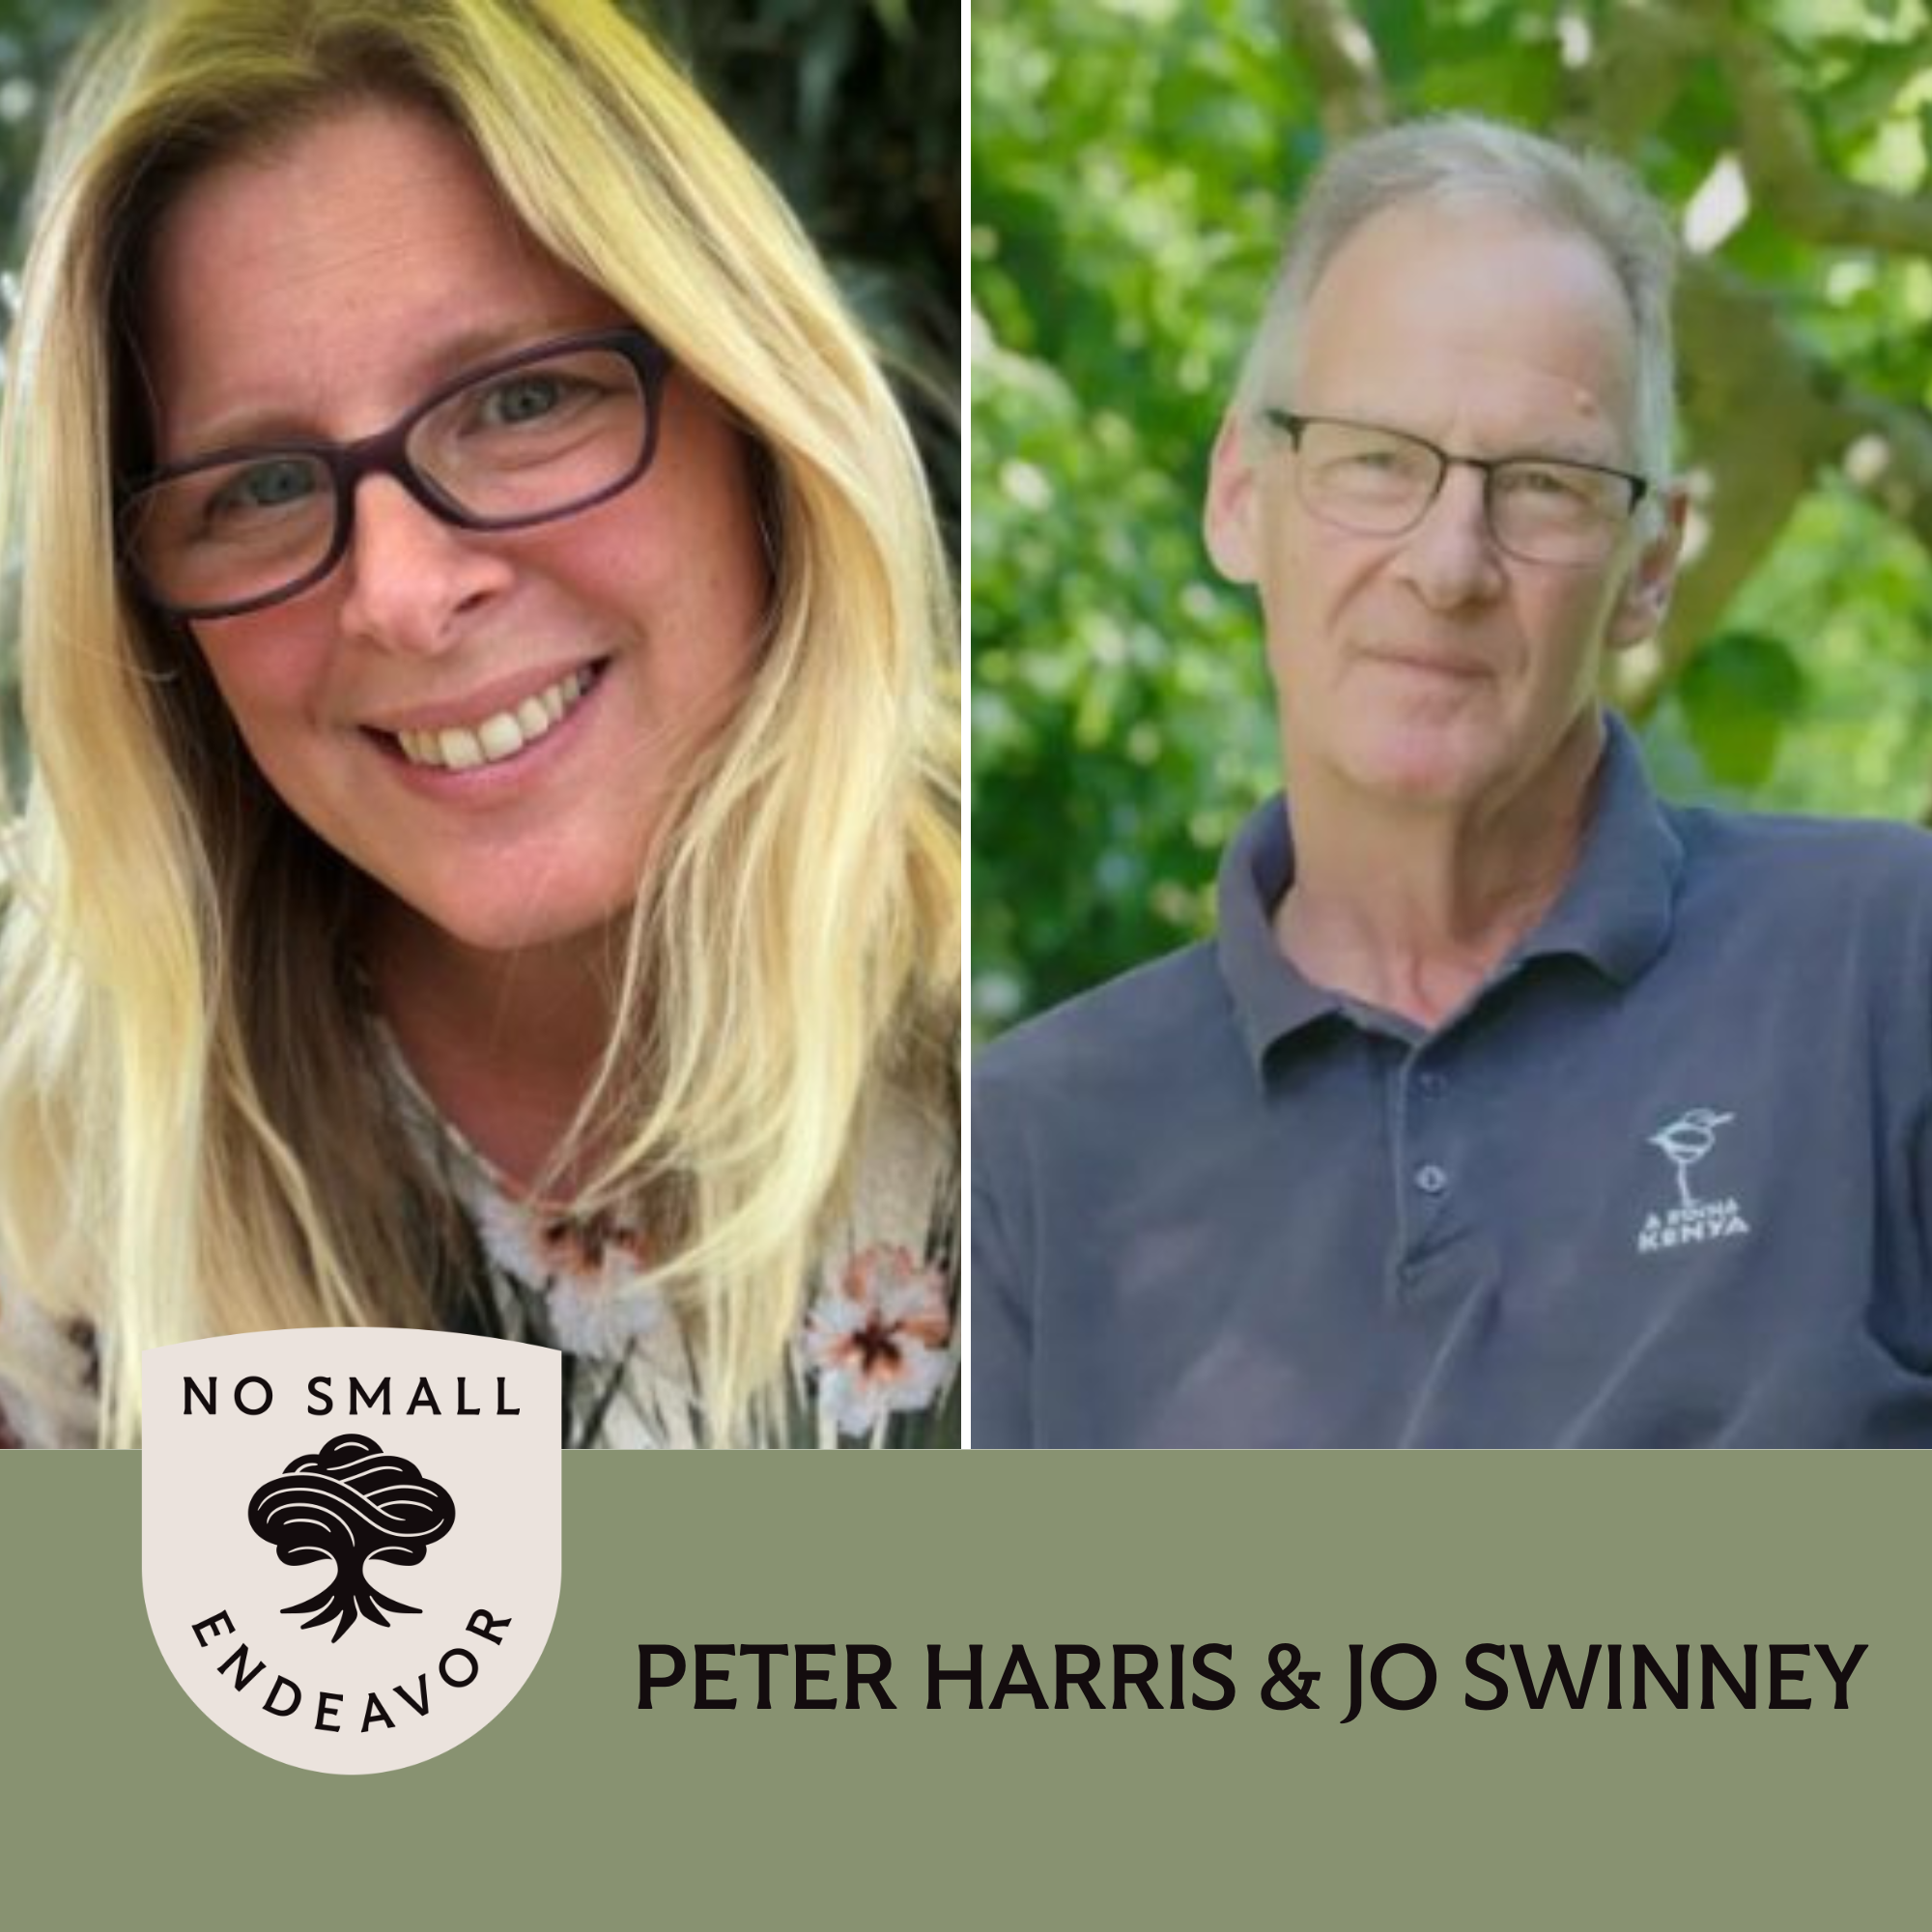 133: Peter Harris and Jo Swinney: A Place at the Table